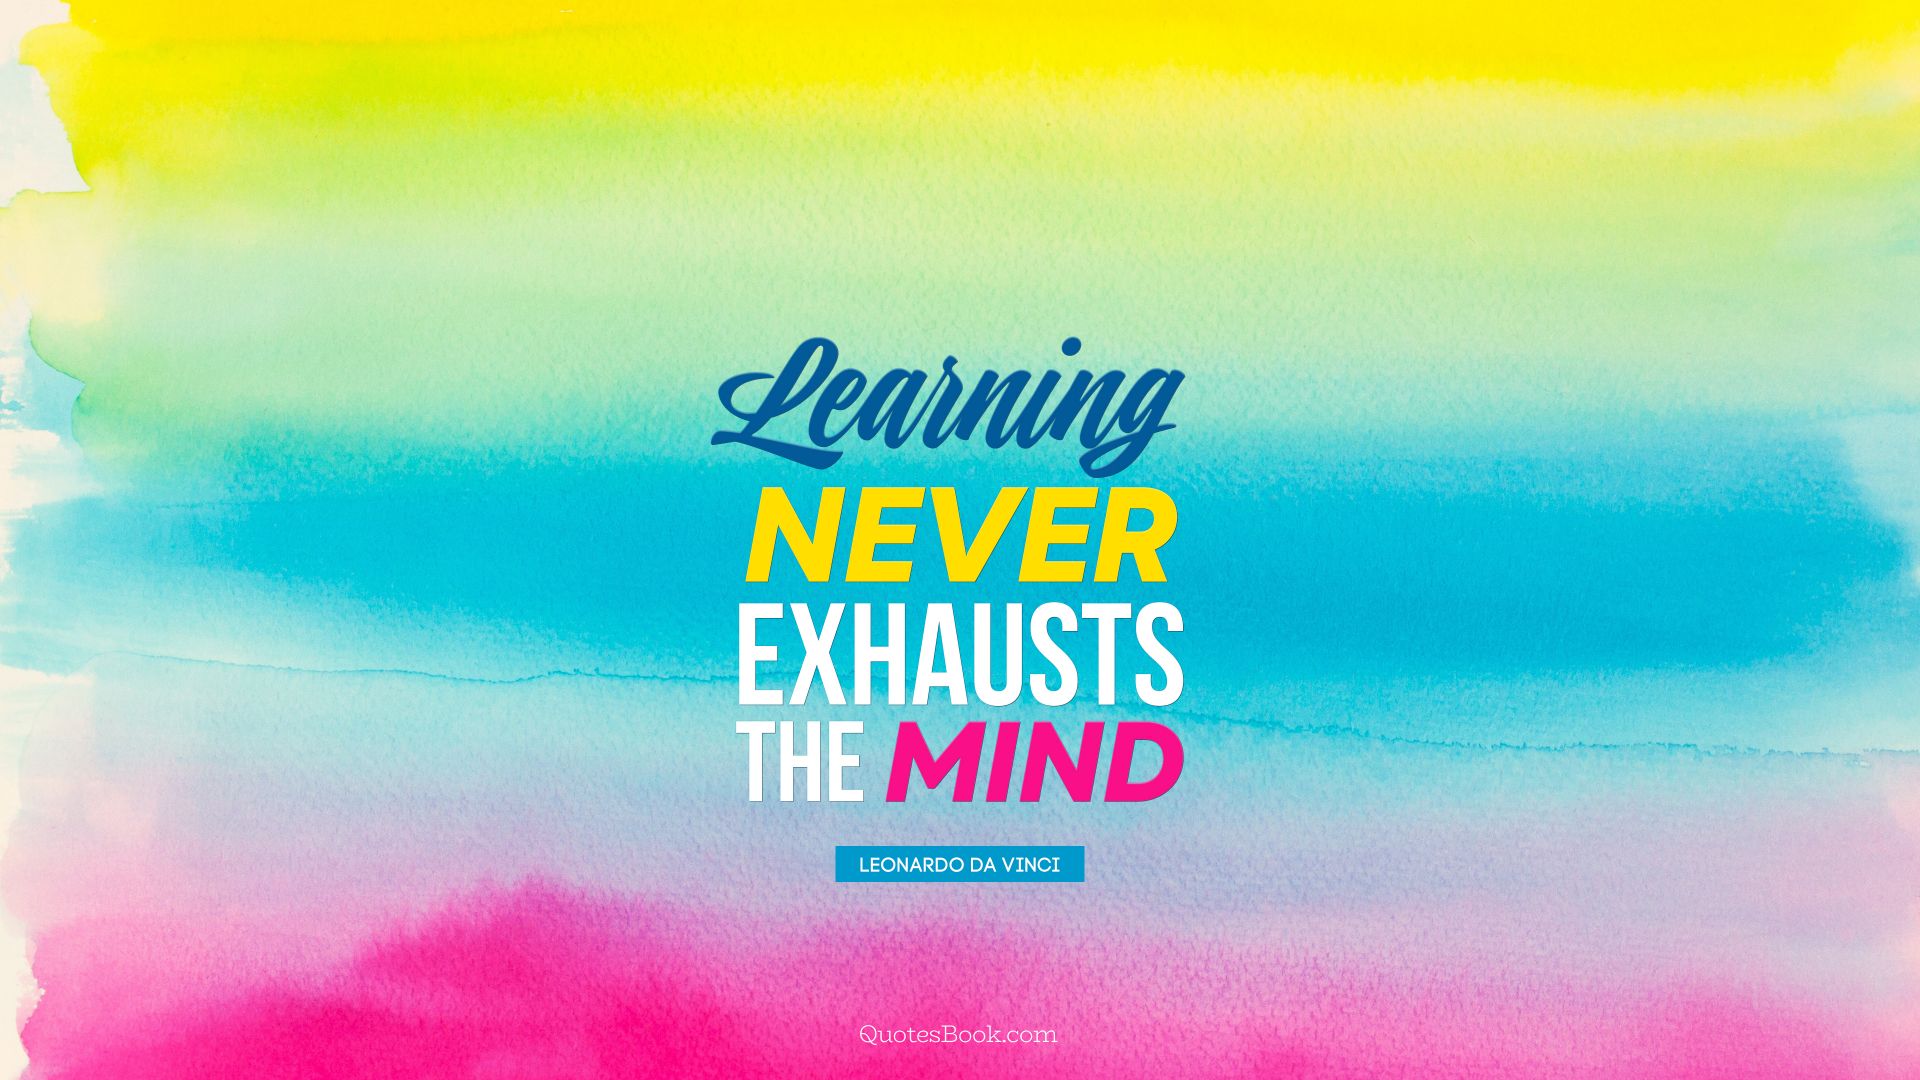 Learning never exhausts the mind. - Quote by Leonardo da Vinci